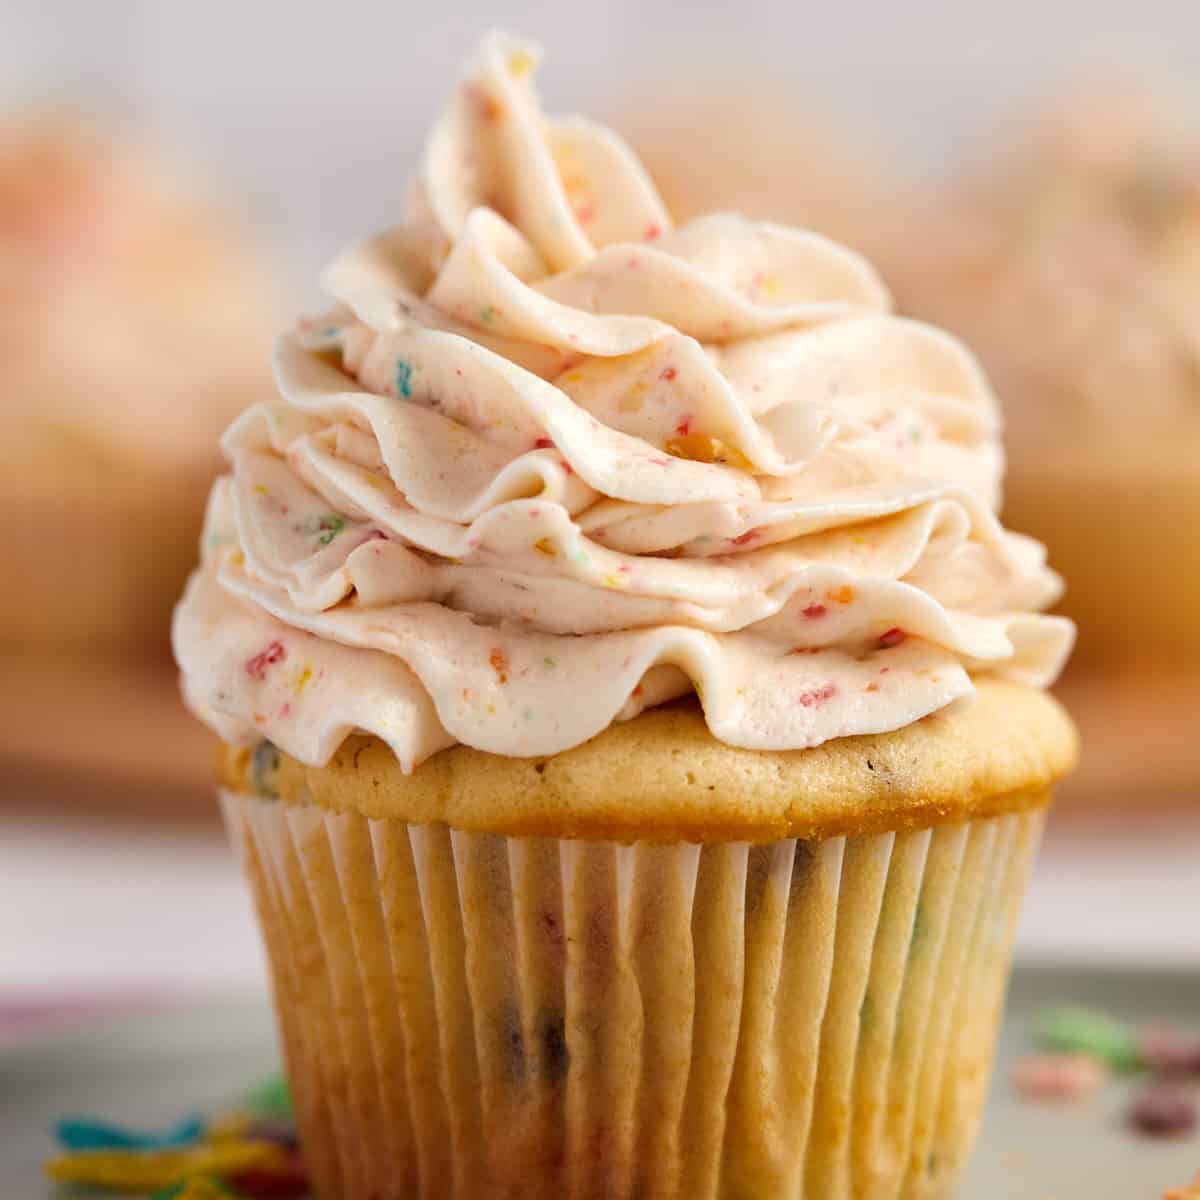 A close-up of a vanilla cupcake topped with a swirl of creamy, fruity pebbles-infused frosting, hinting at a delightful, sweet treat.